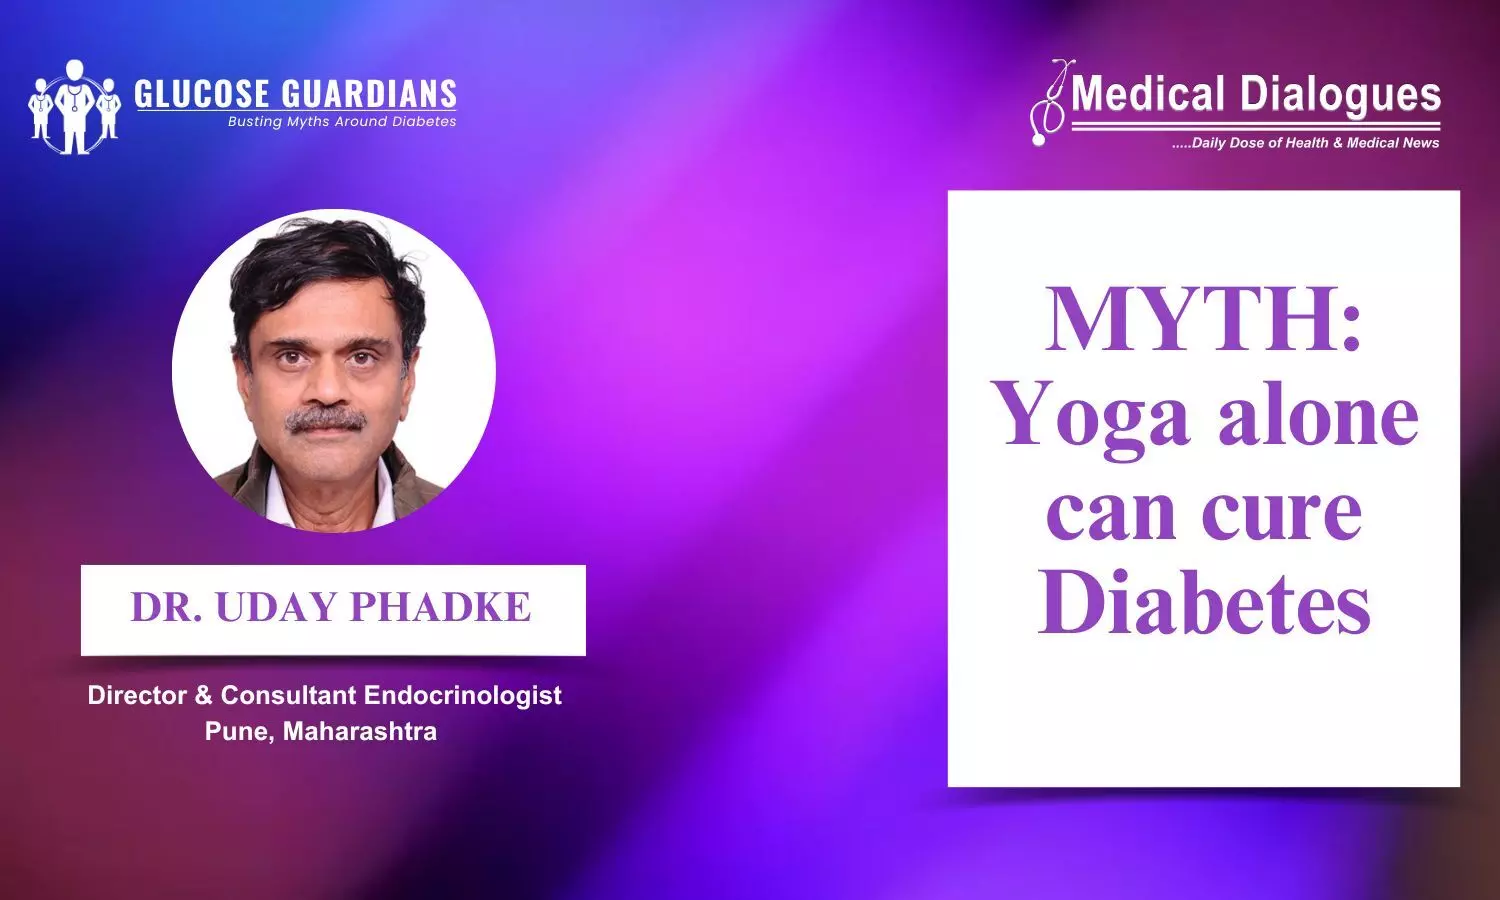 Can diabetes be cured solely through yoga? - Dr Uday Phadke